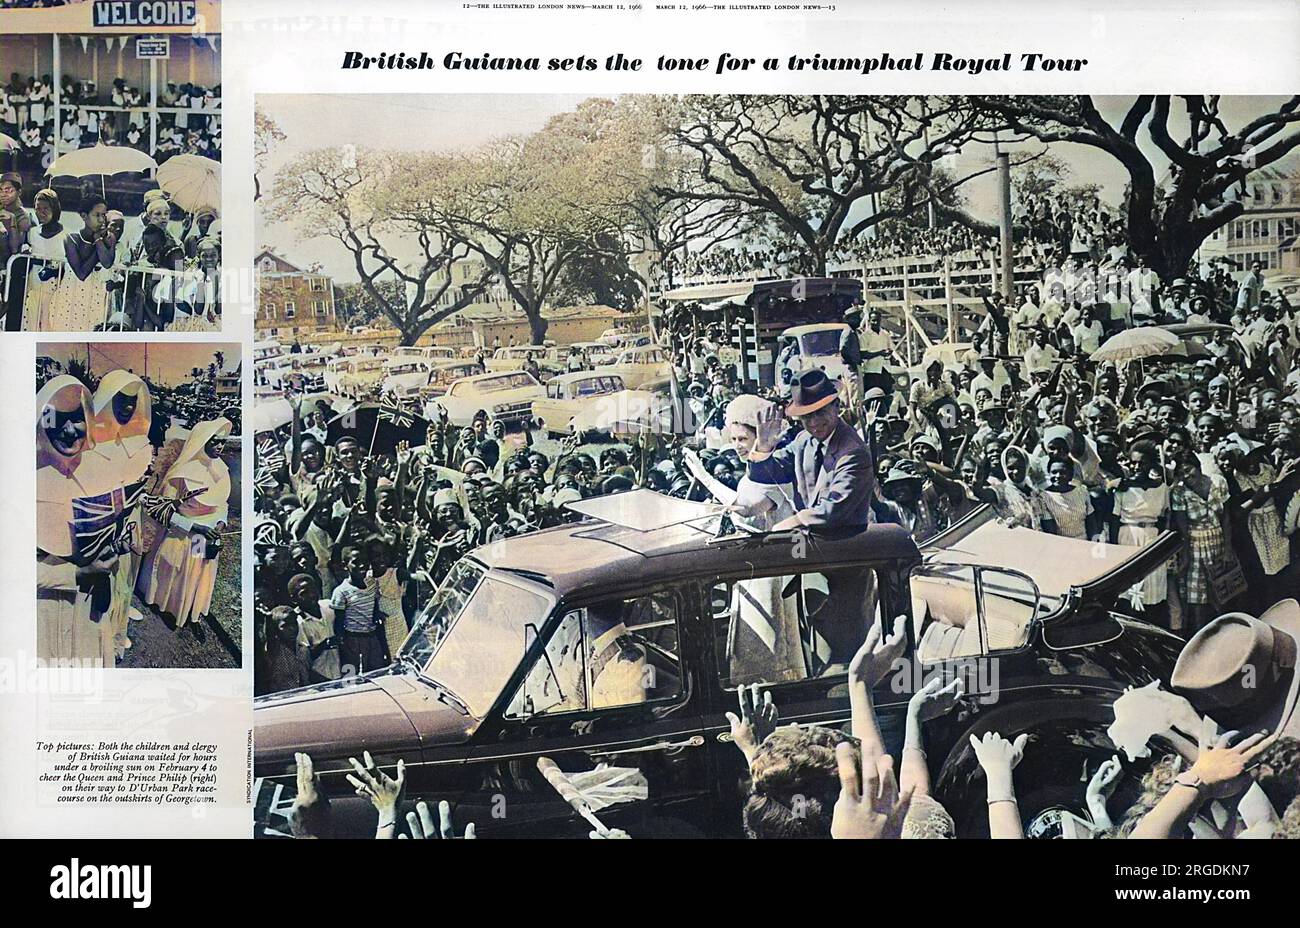 The Queen and Prince Philip wave to the crowds from their open-top car as they travel through British Guiana on their Royal Tour. Stock Photo